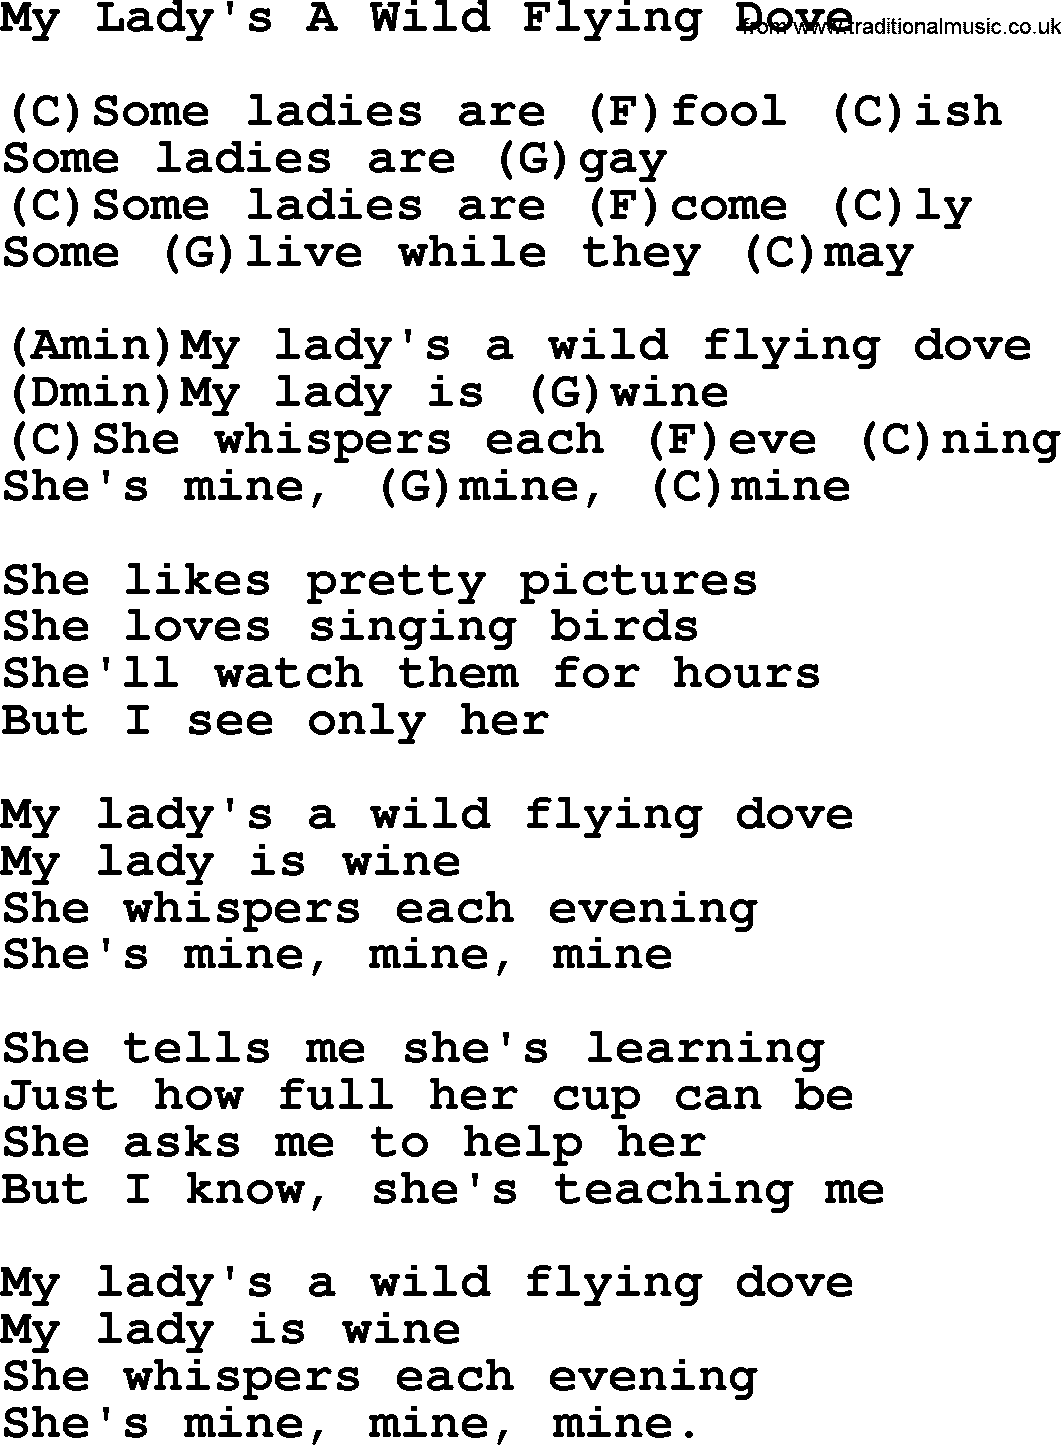 Tom Paxton song: My Lady's A Wild Flying Dove, lyrics and chords